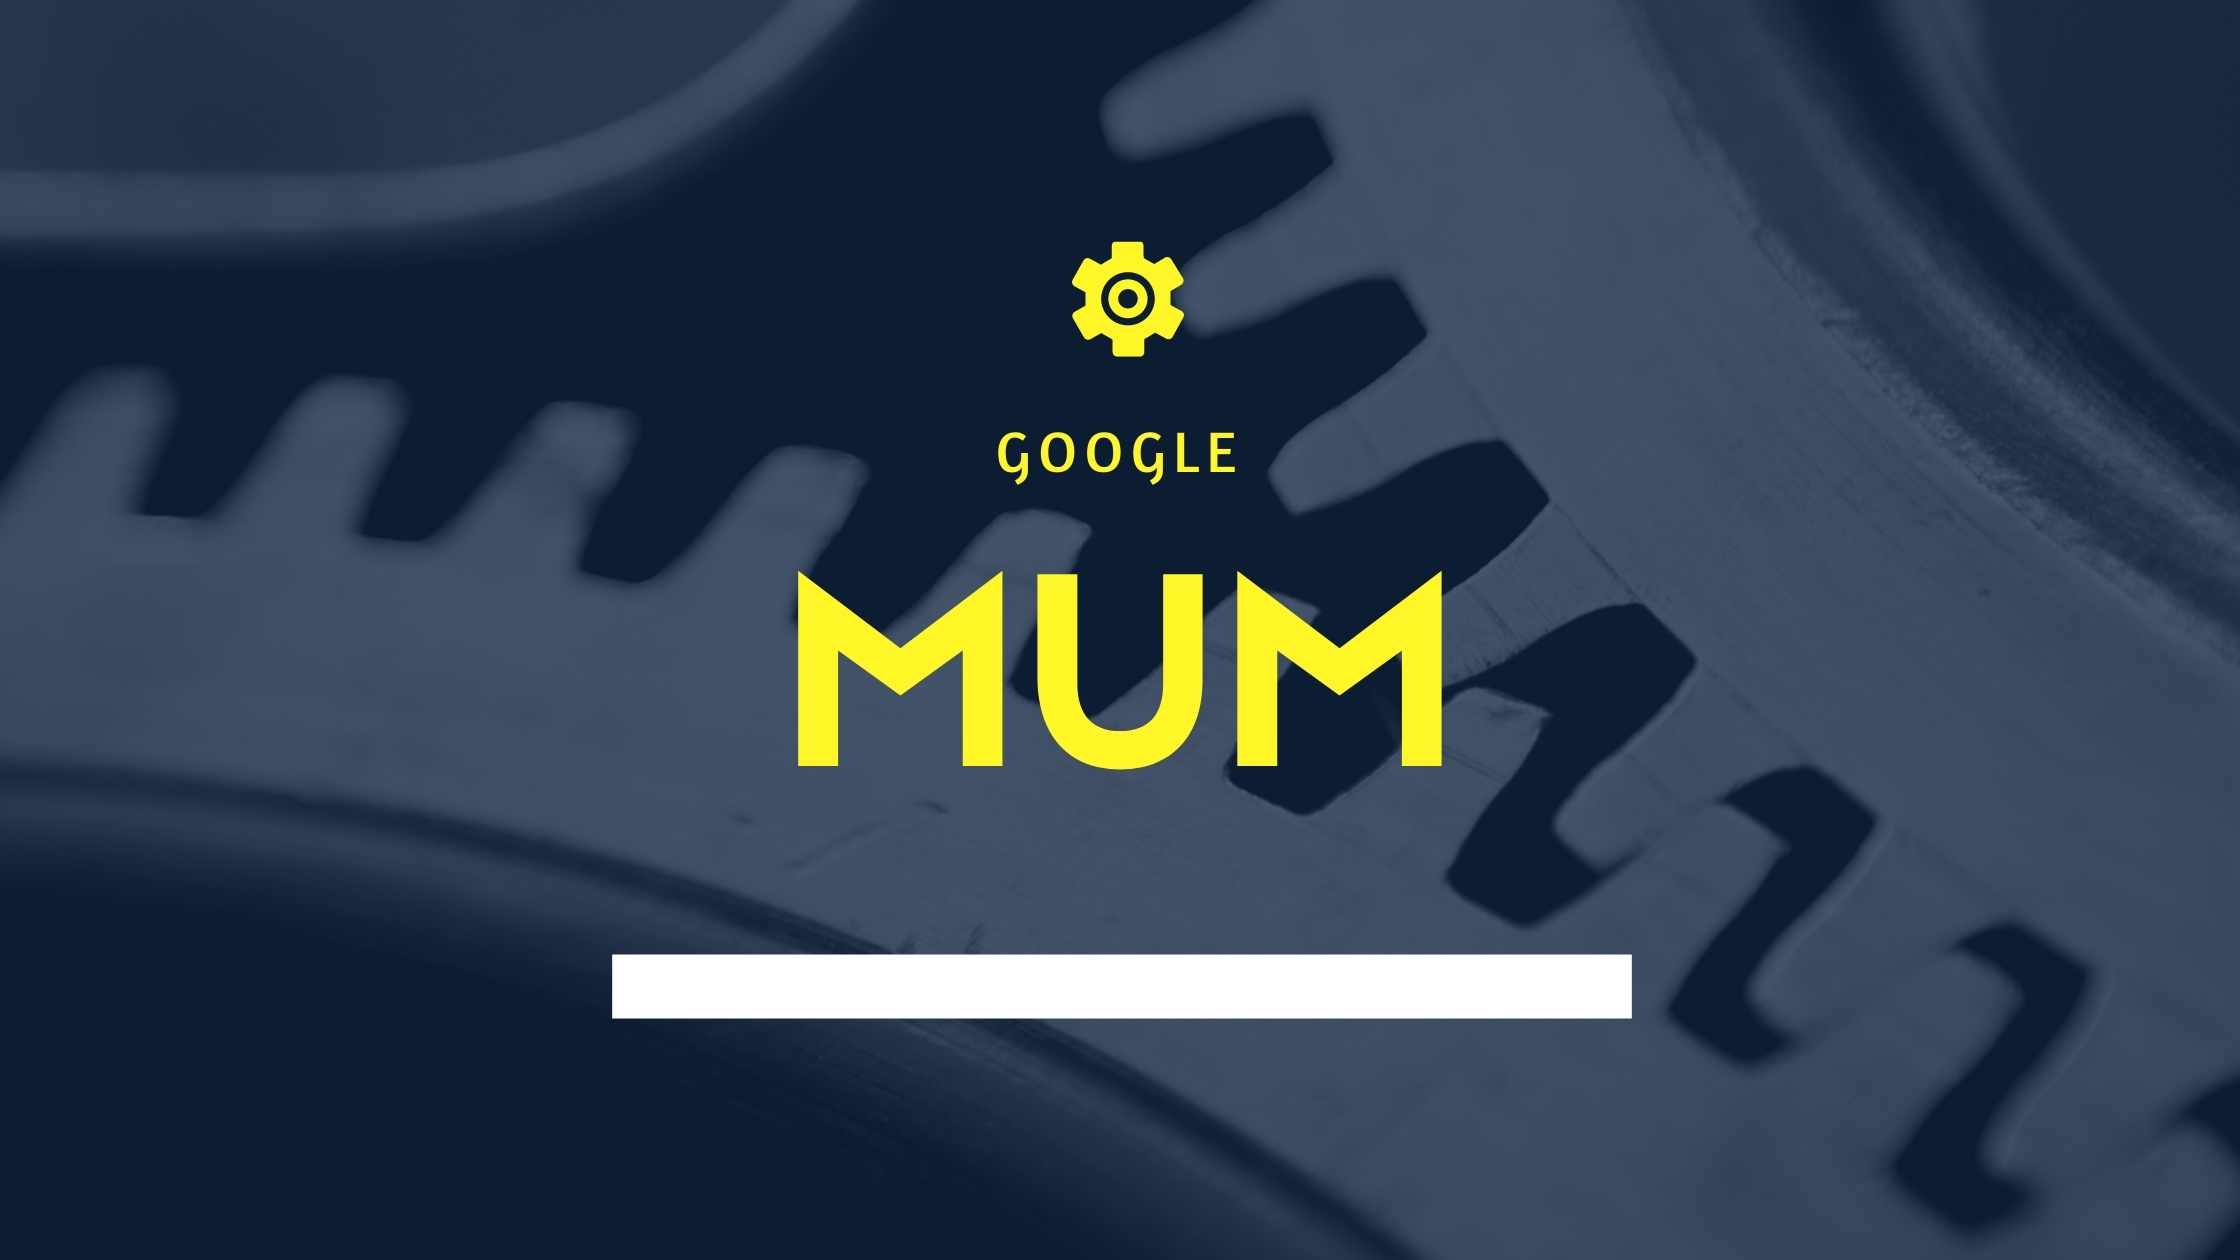 Google’s Multitask Unified Model (MUM) Update and What It Means for Your Website